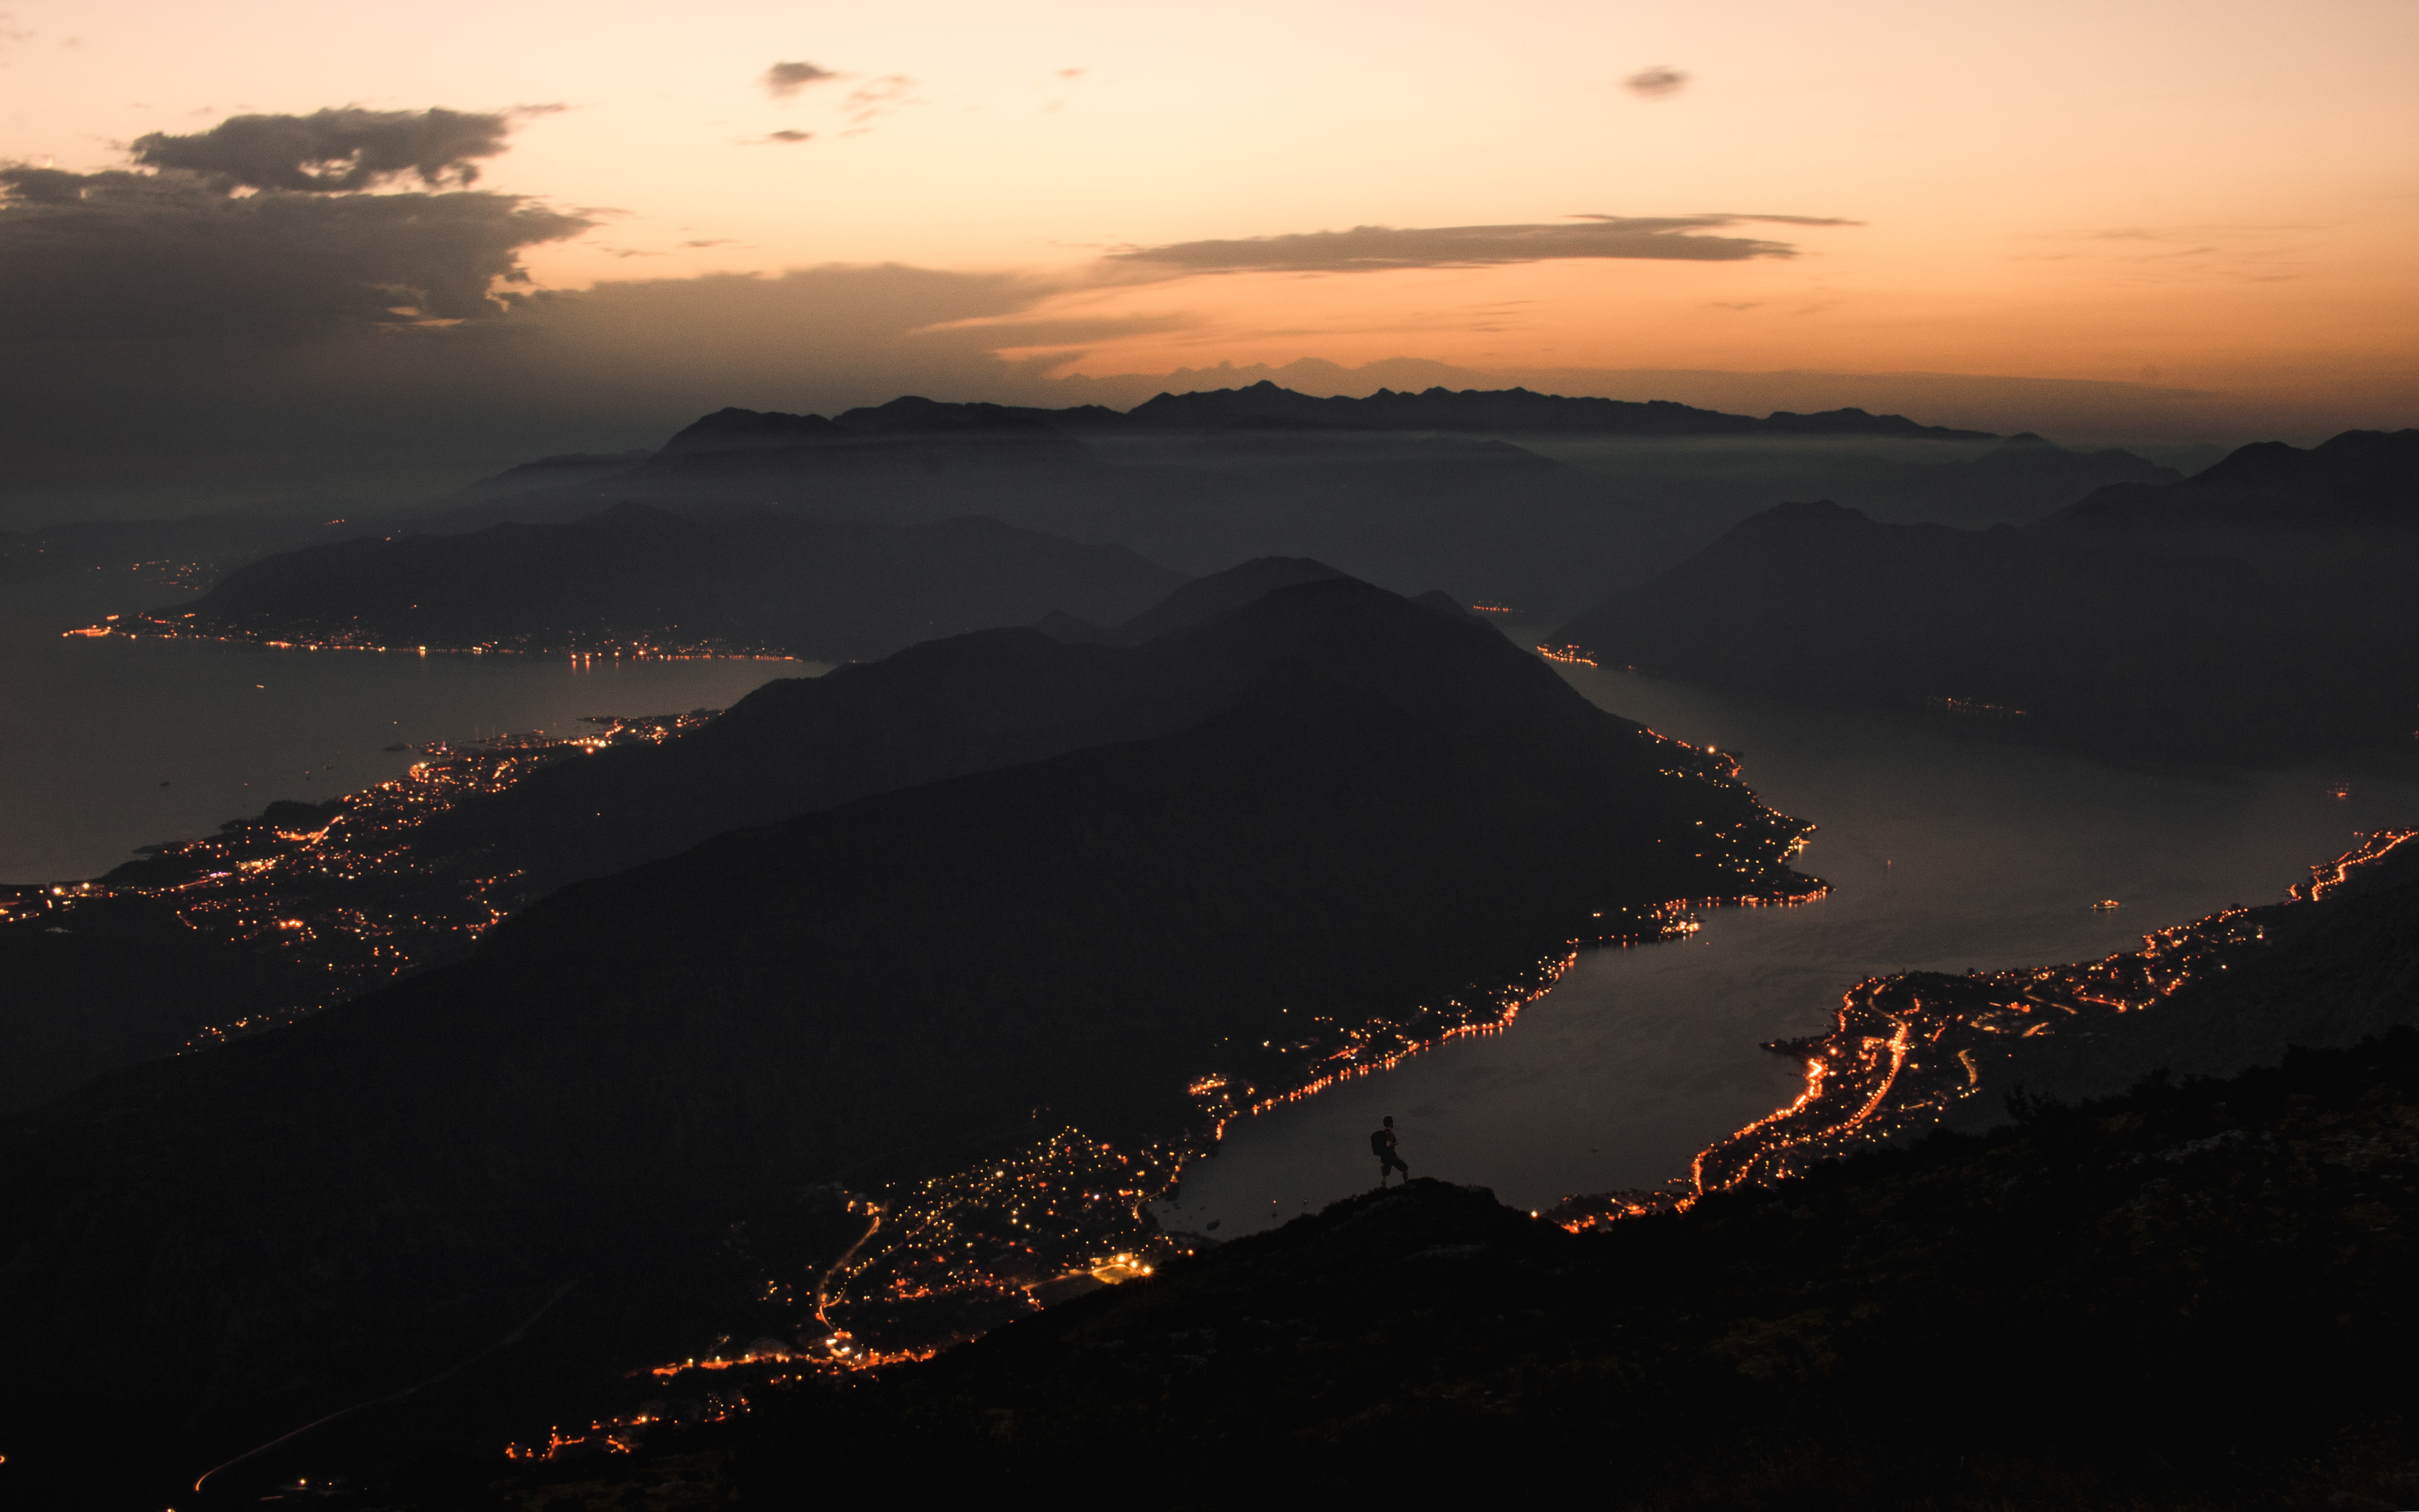 lights, night, dark, mountains, coast, city, view from above High Definition image